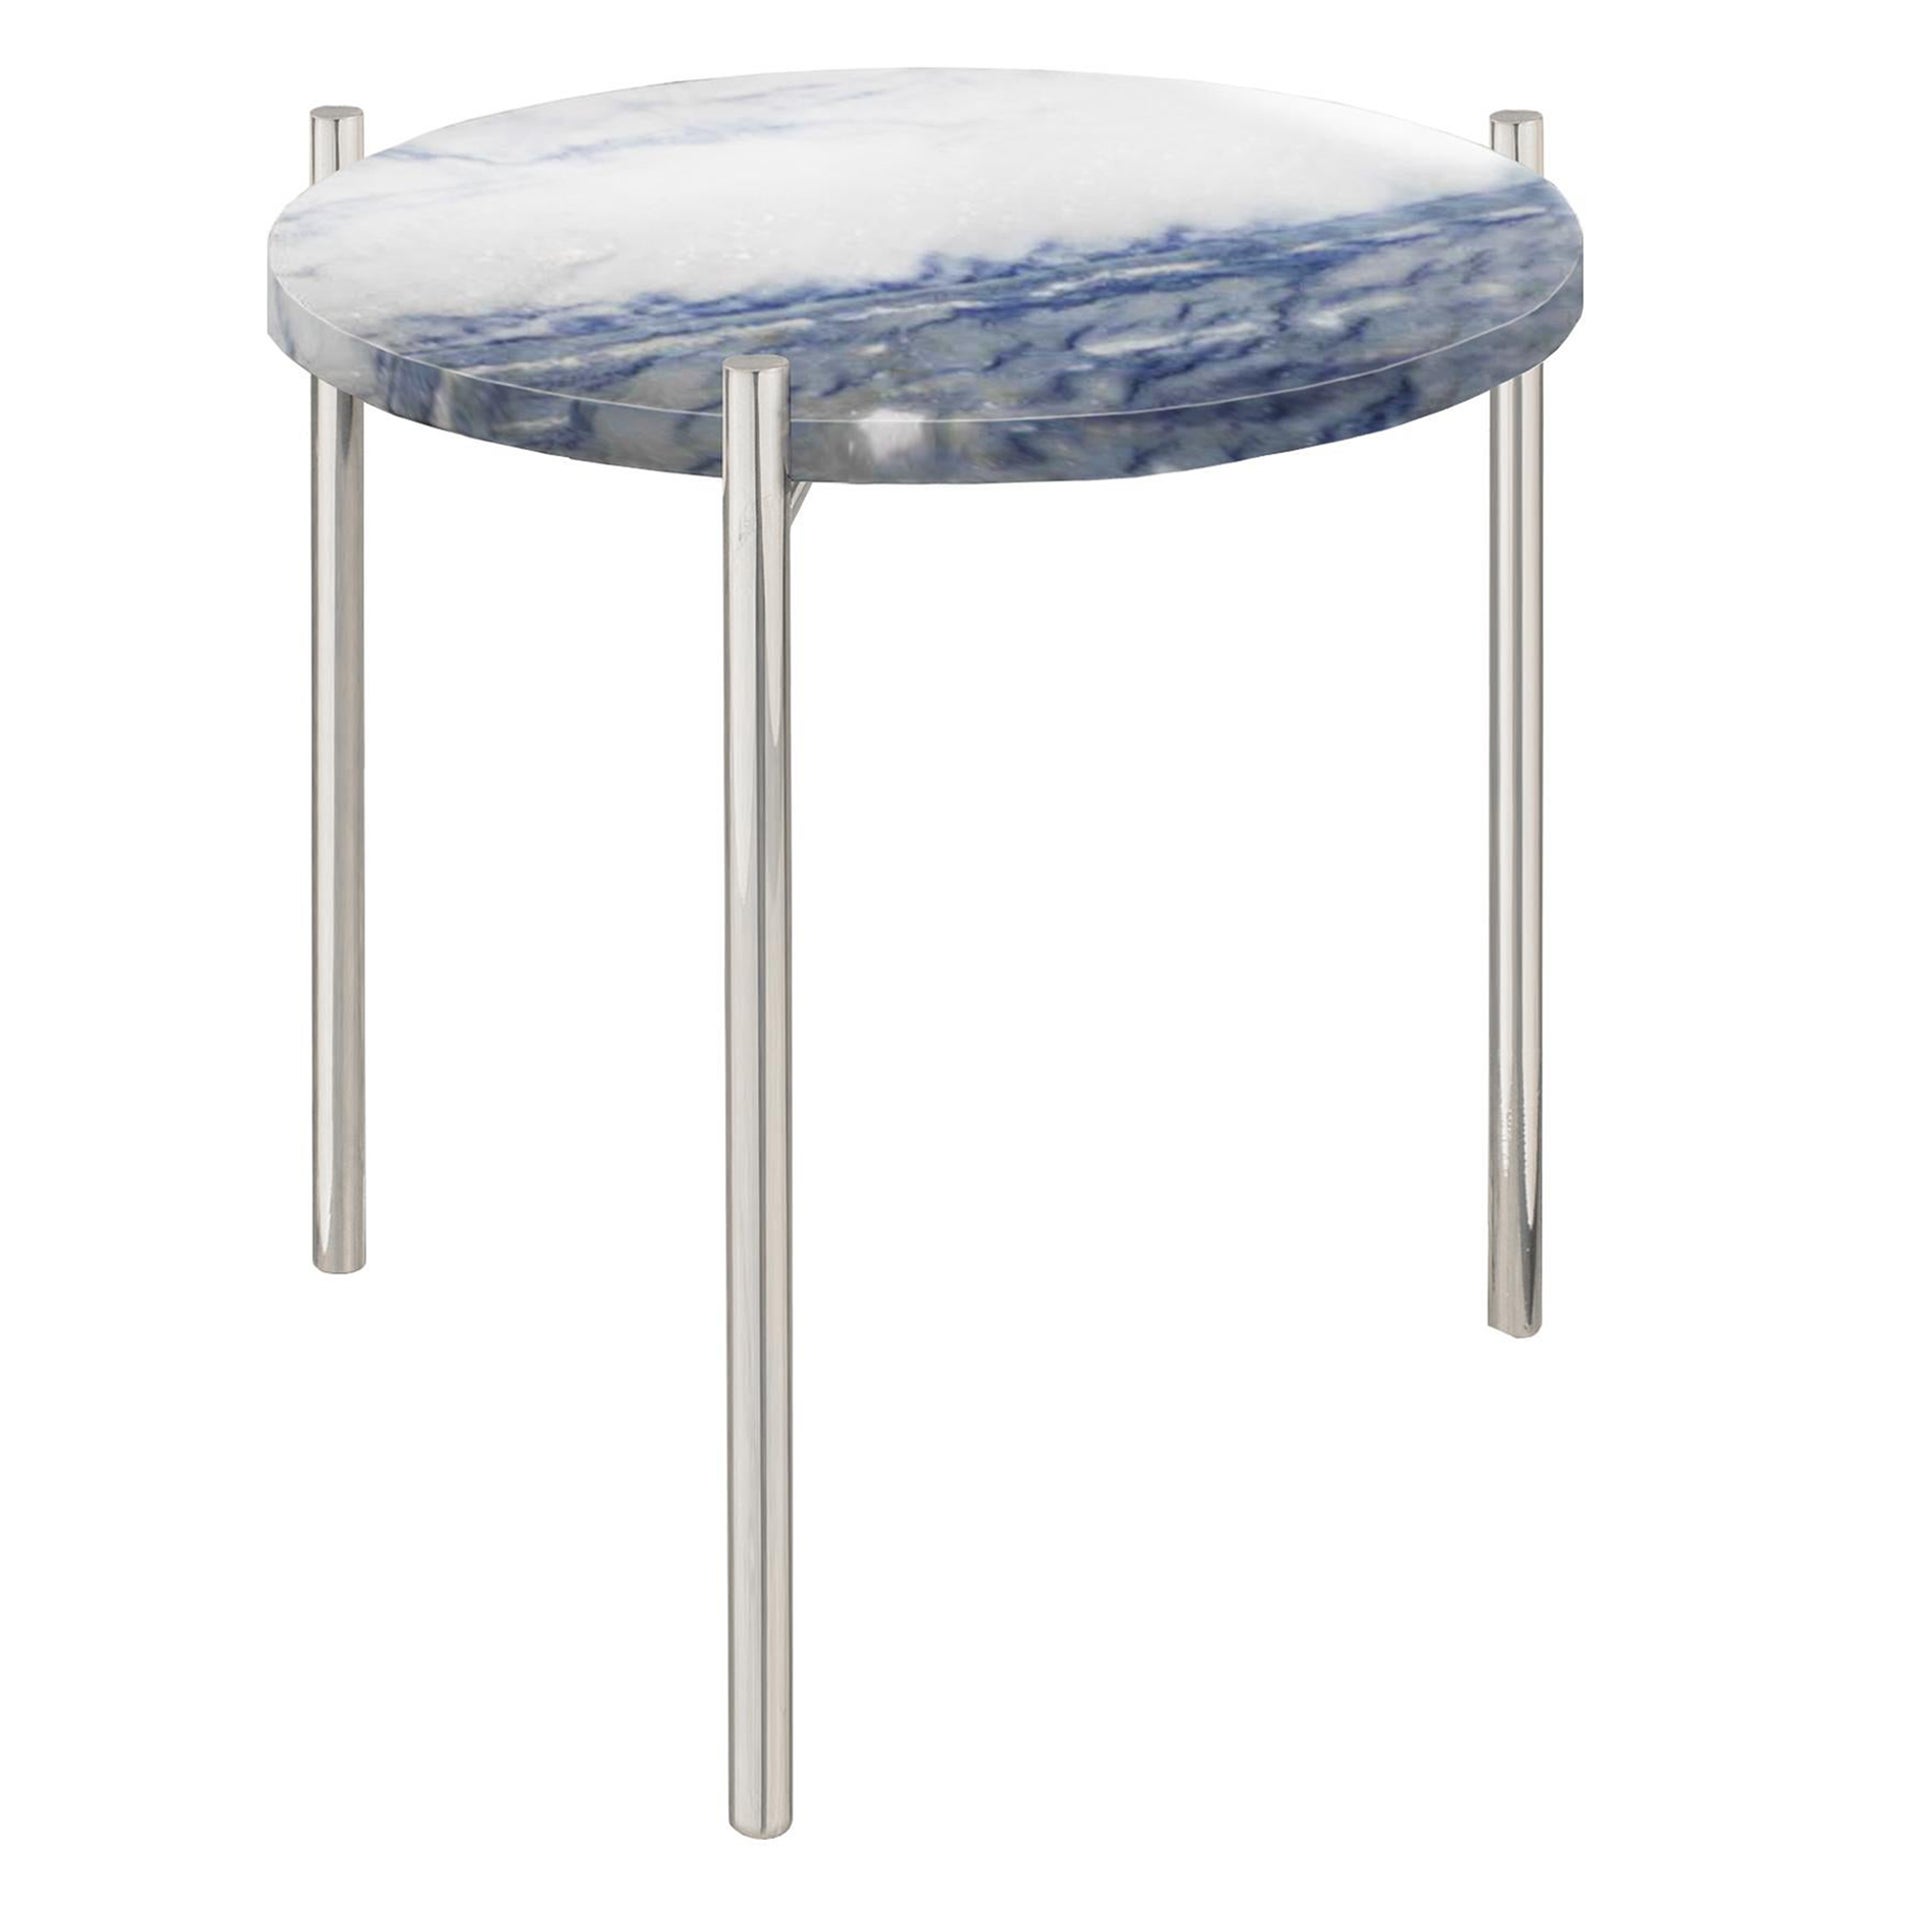 Pair of Blue White Marble Stainless Steel Side Tables For Sale